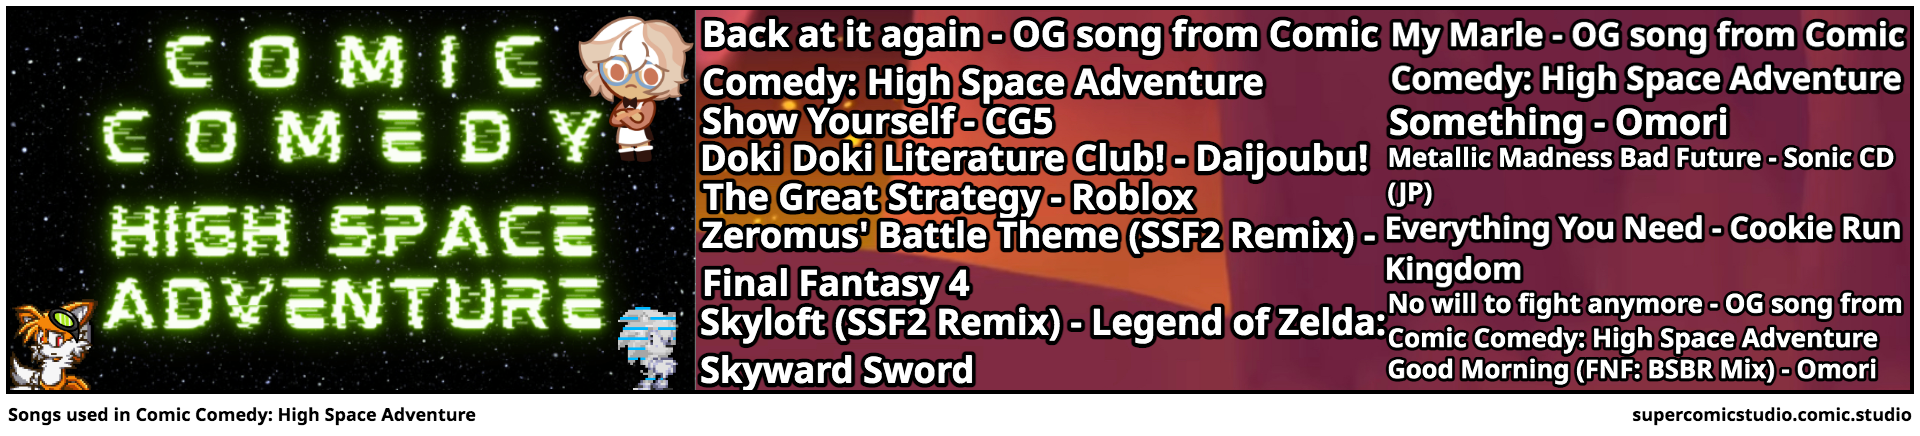 Songs used in Comic Comedy: High Space Adventure